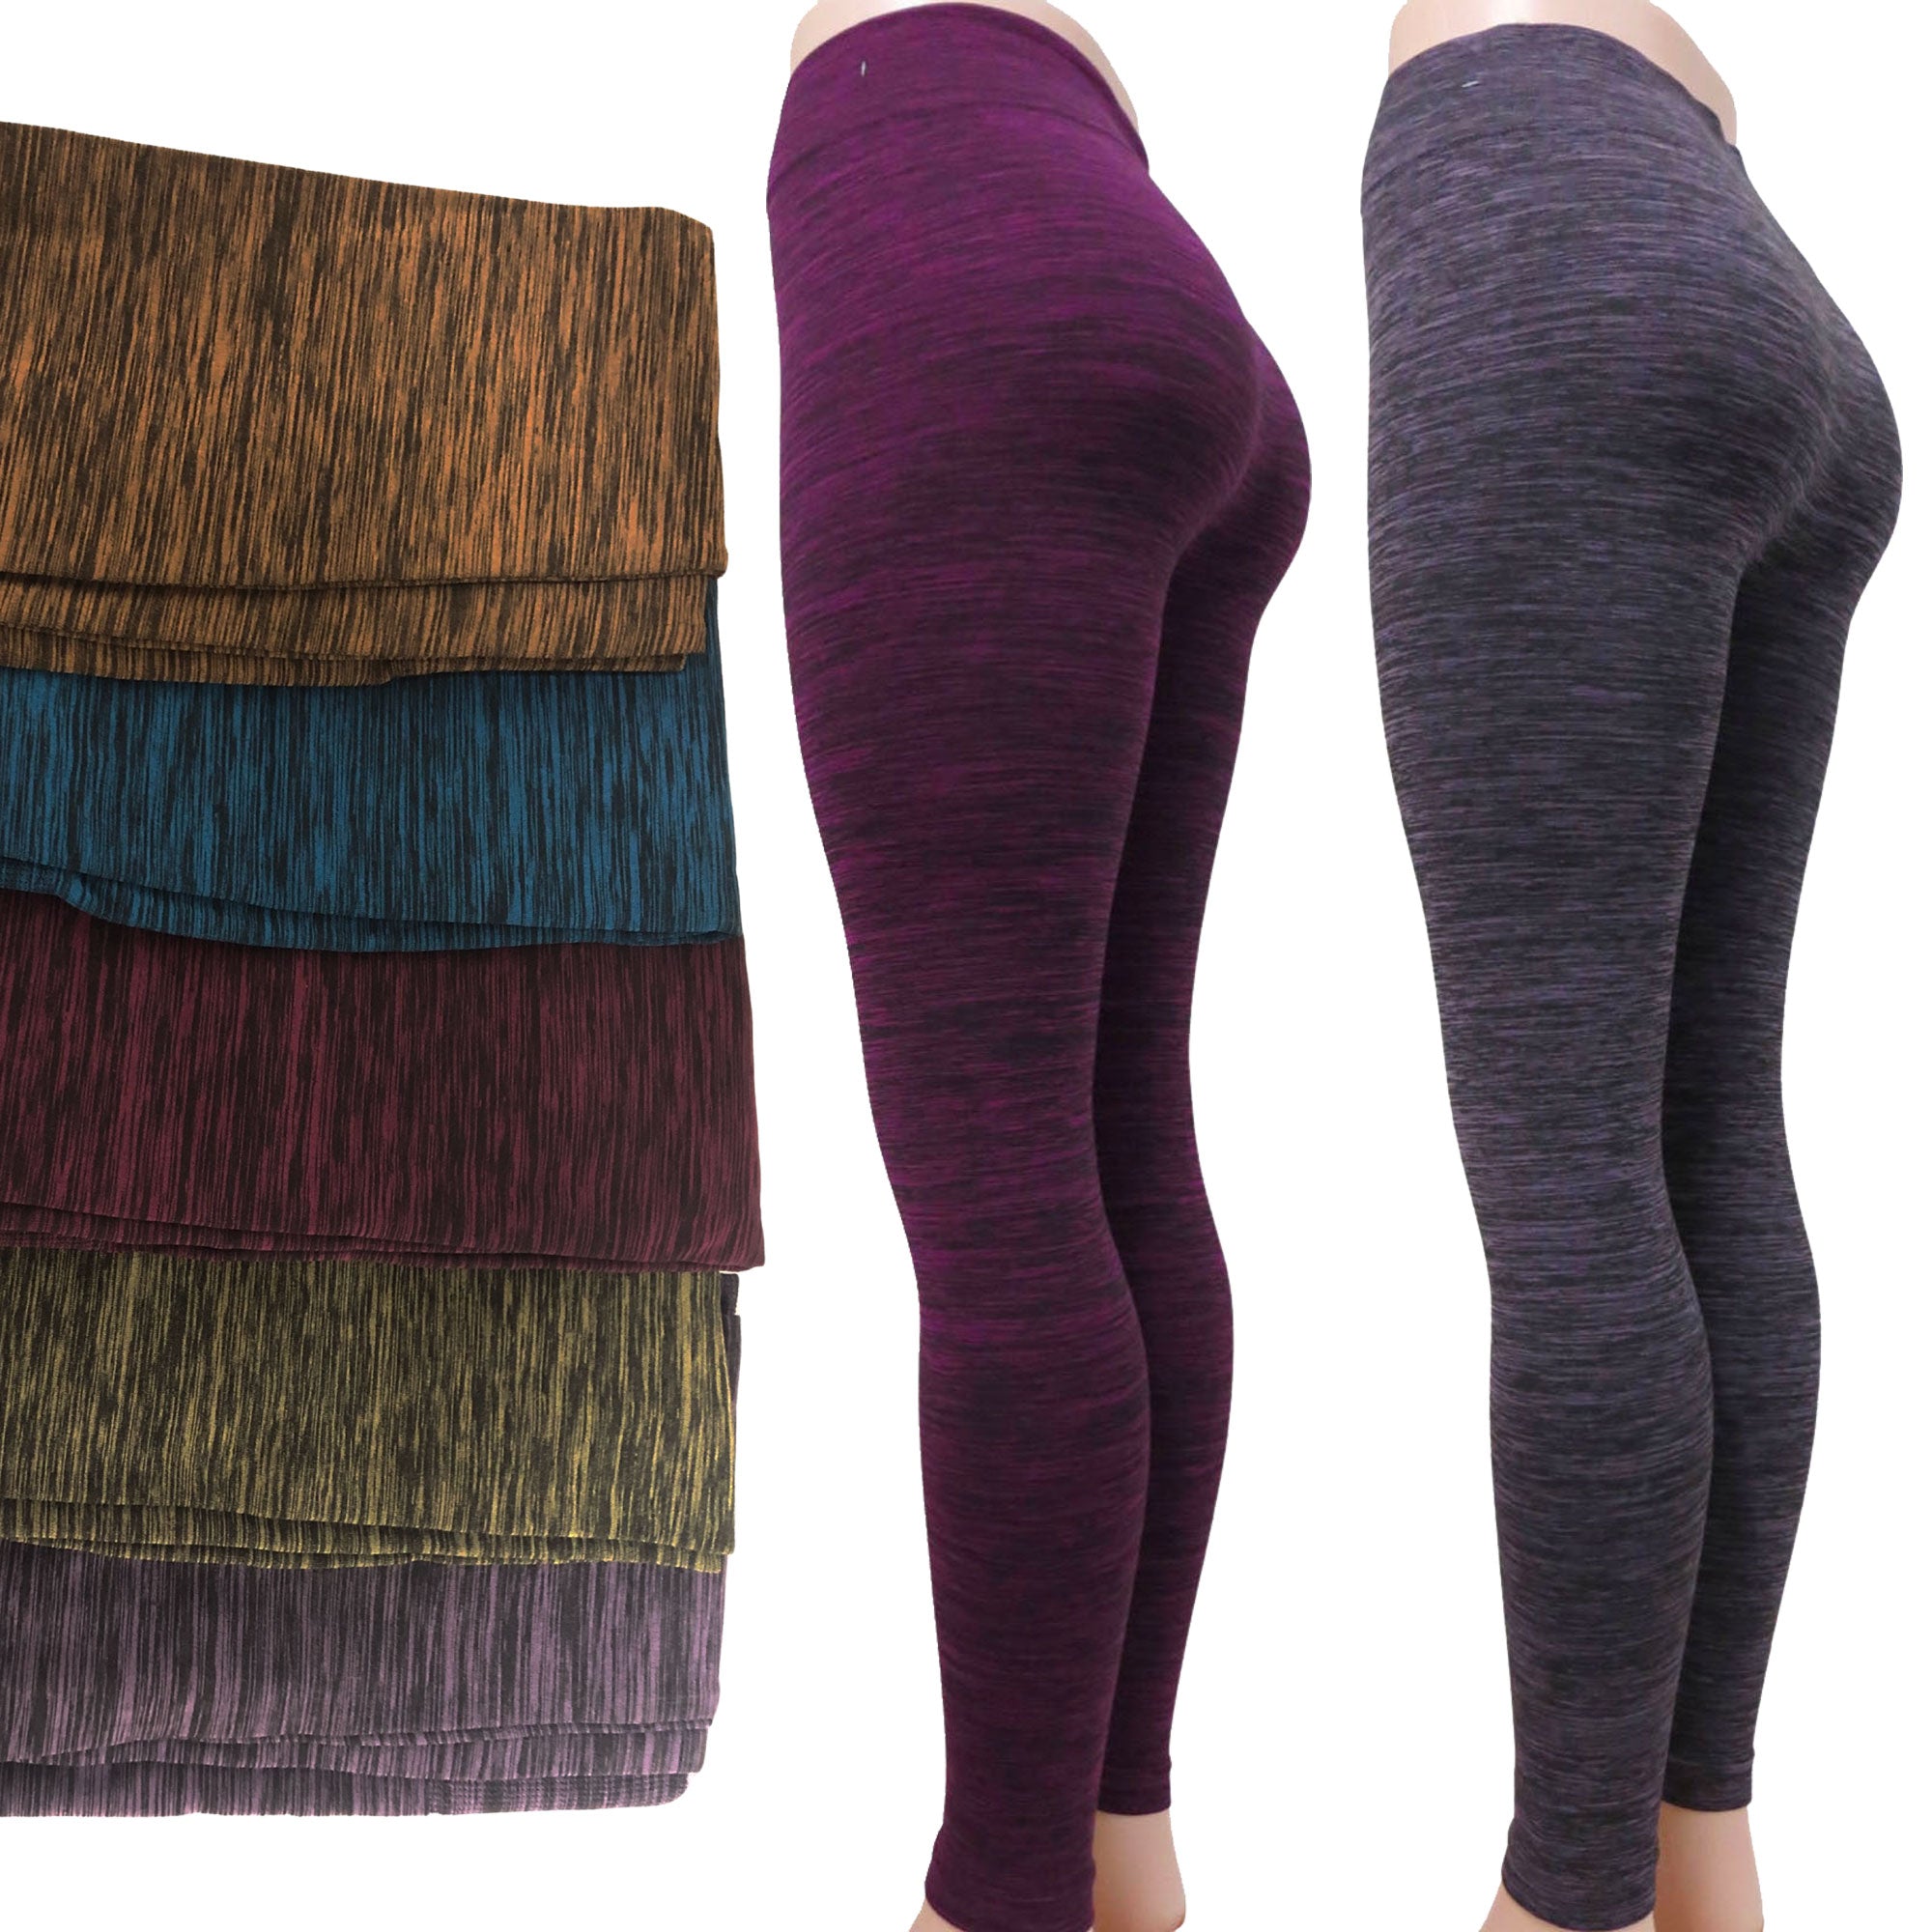 Purchase Wholesale hot yoga shorts. Free Returns & Net 60 Terms on